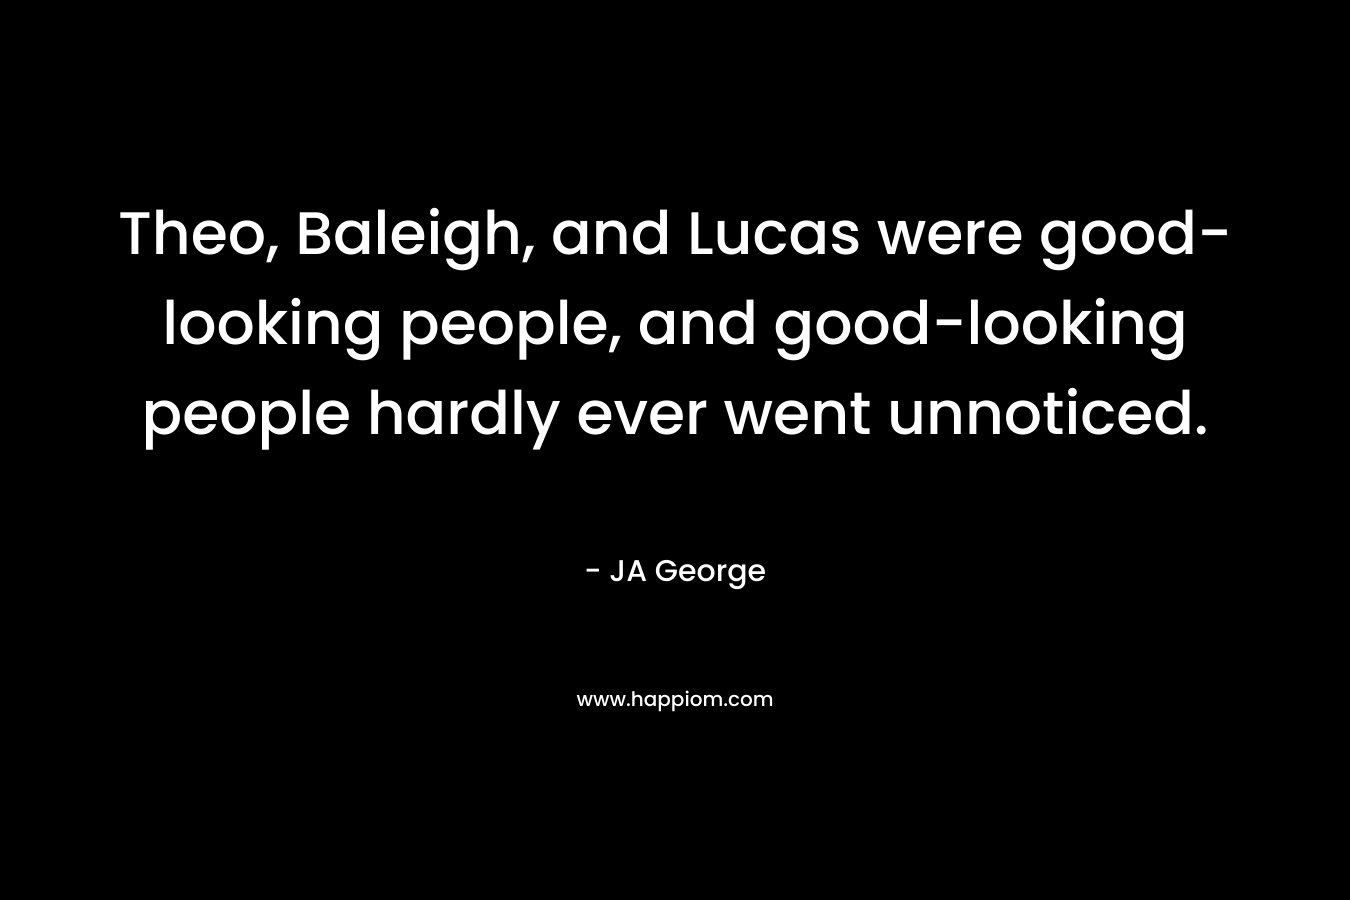 Theo, Baleigh, and Lucas were good-looking people, and good-looking people hardly ever went unnoticed. – JA George